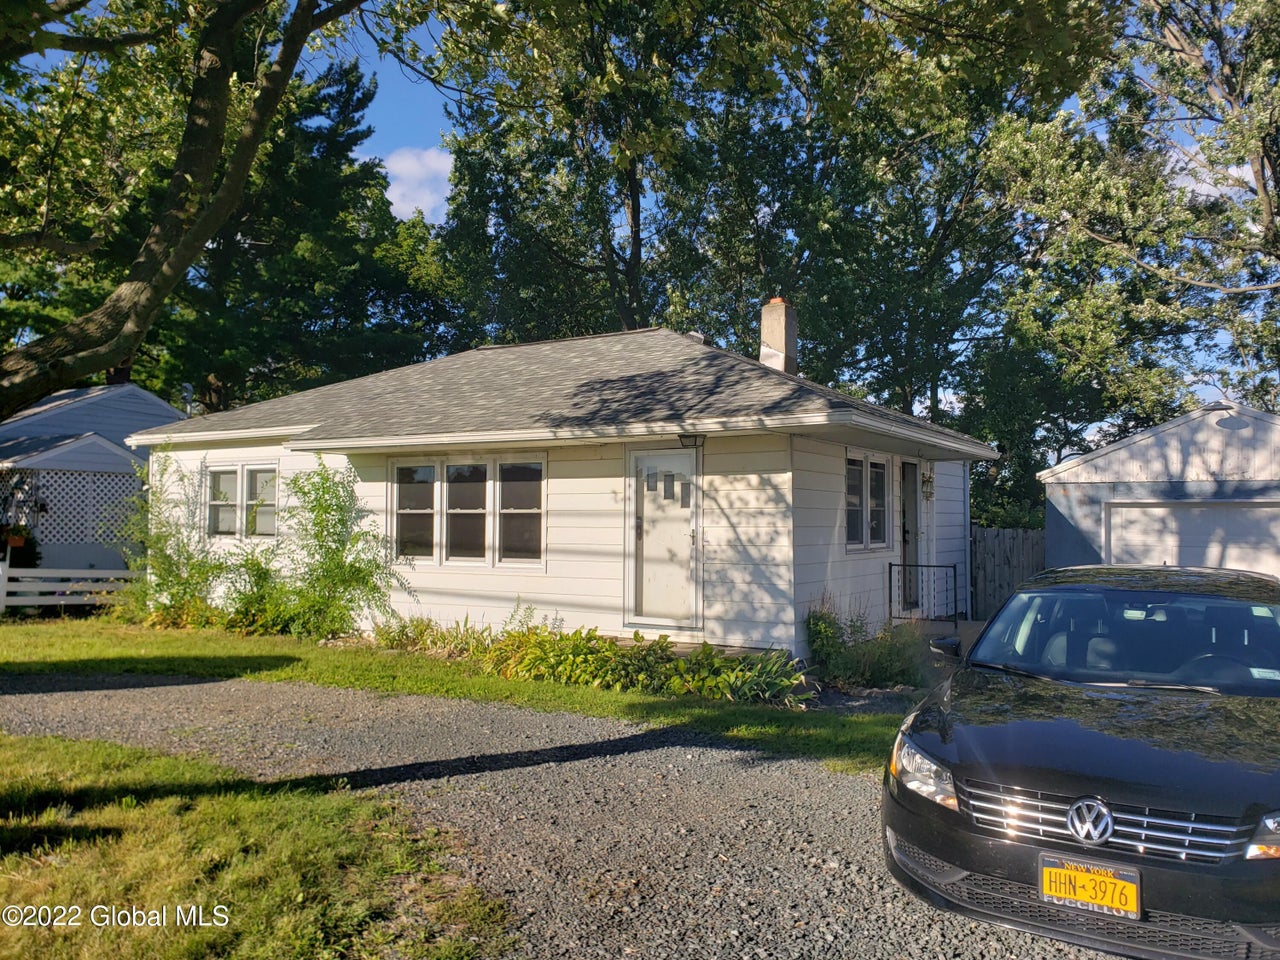 21 Forts Ferry Road Latham Home Listings - Burns Real Estate Solutions Capital Region Real Estate Market Area